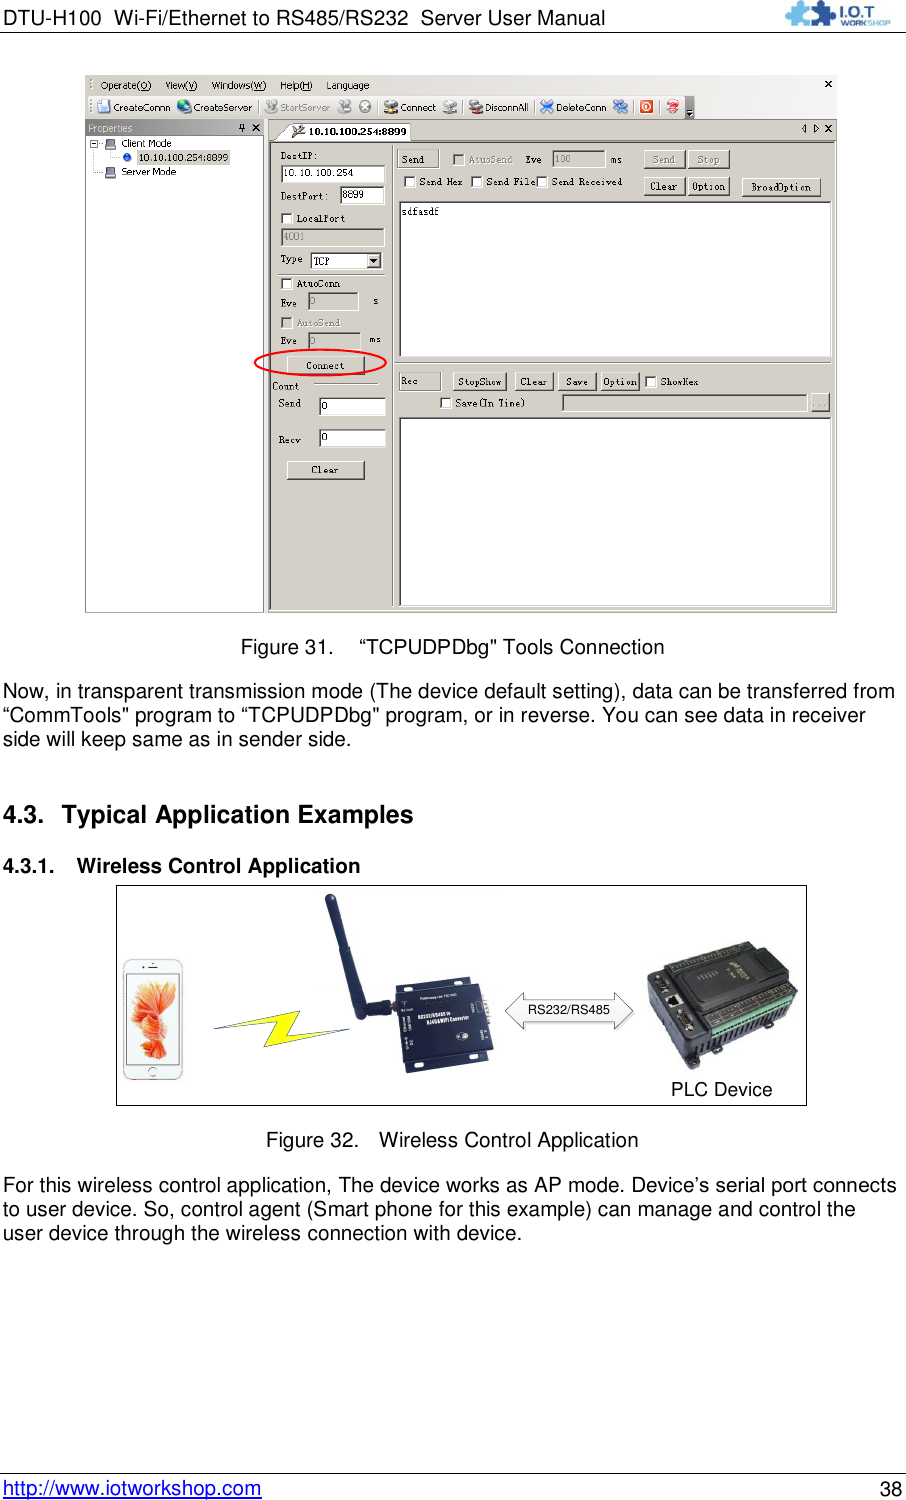 DTU-H100 Wi-Fi/Ethernet to RS485/RS232  Server User Manual    http://www.iotworkshop.com 38  Figure 31.  “TCPUDPDbg&quot; Tools Connection Now, in transparent transmission mode (The device default setting), data can be transferred from “CommTools&quot; program to “TCPUDPDbg&quot; program, or in reverse. You can see data in receiver side will keep same as in sender side. 4.3. Typical Application Examples 4.3.1. Wireless Control Application PLC DeviceRS232/RS485 Figure 32. Wireless Control Application For this wireless control application, The device works as AP mode. Device‟s serial port connects to user device. So, control agent (Smart phone for this example) can manage and control the user device through the wireless connection with device. 